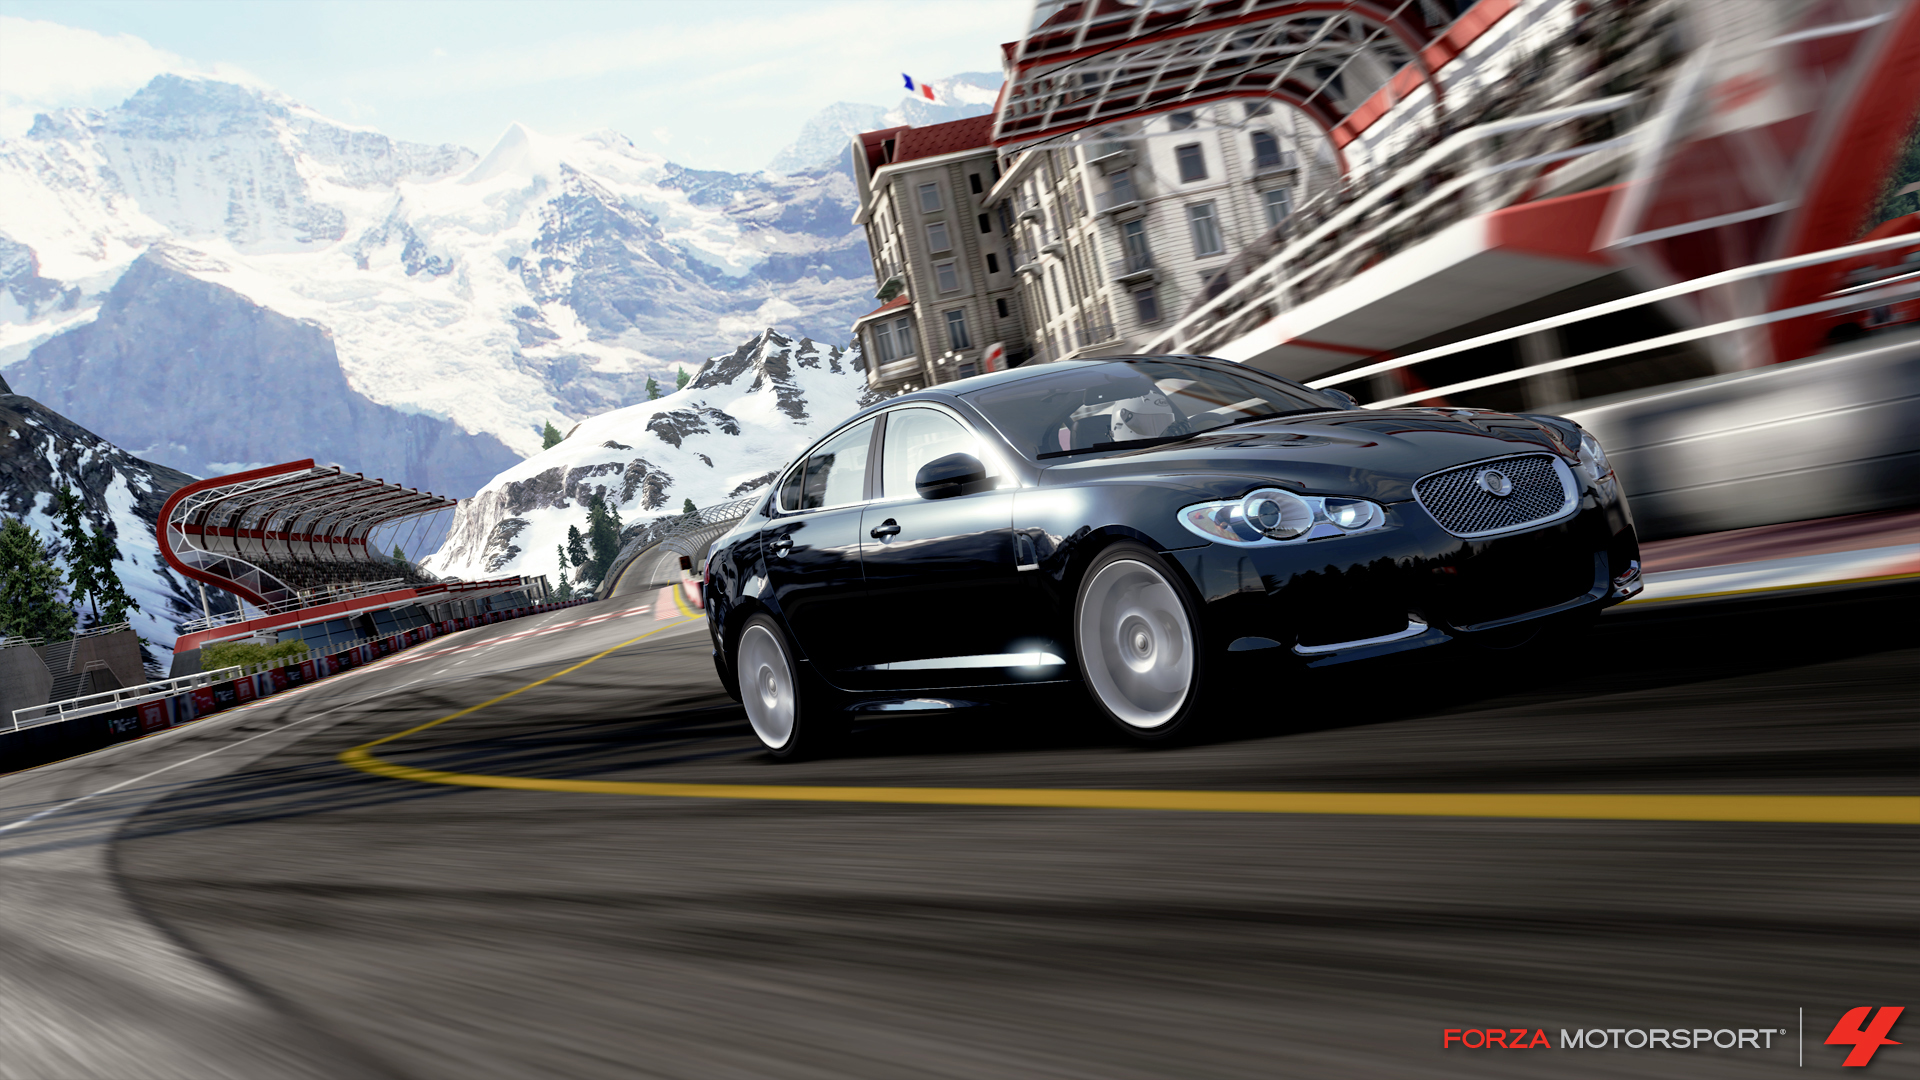 Forza 4 demo details and new stunning screenshots